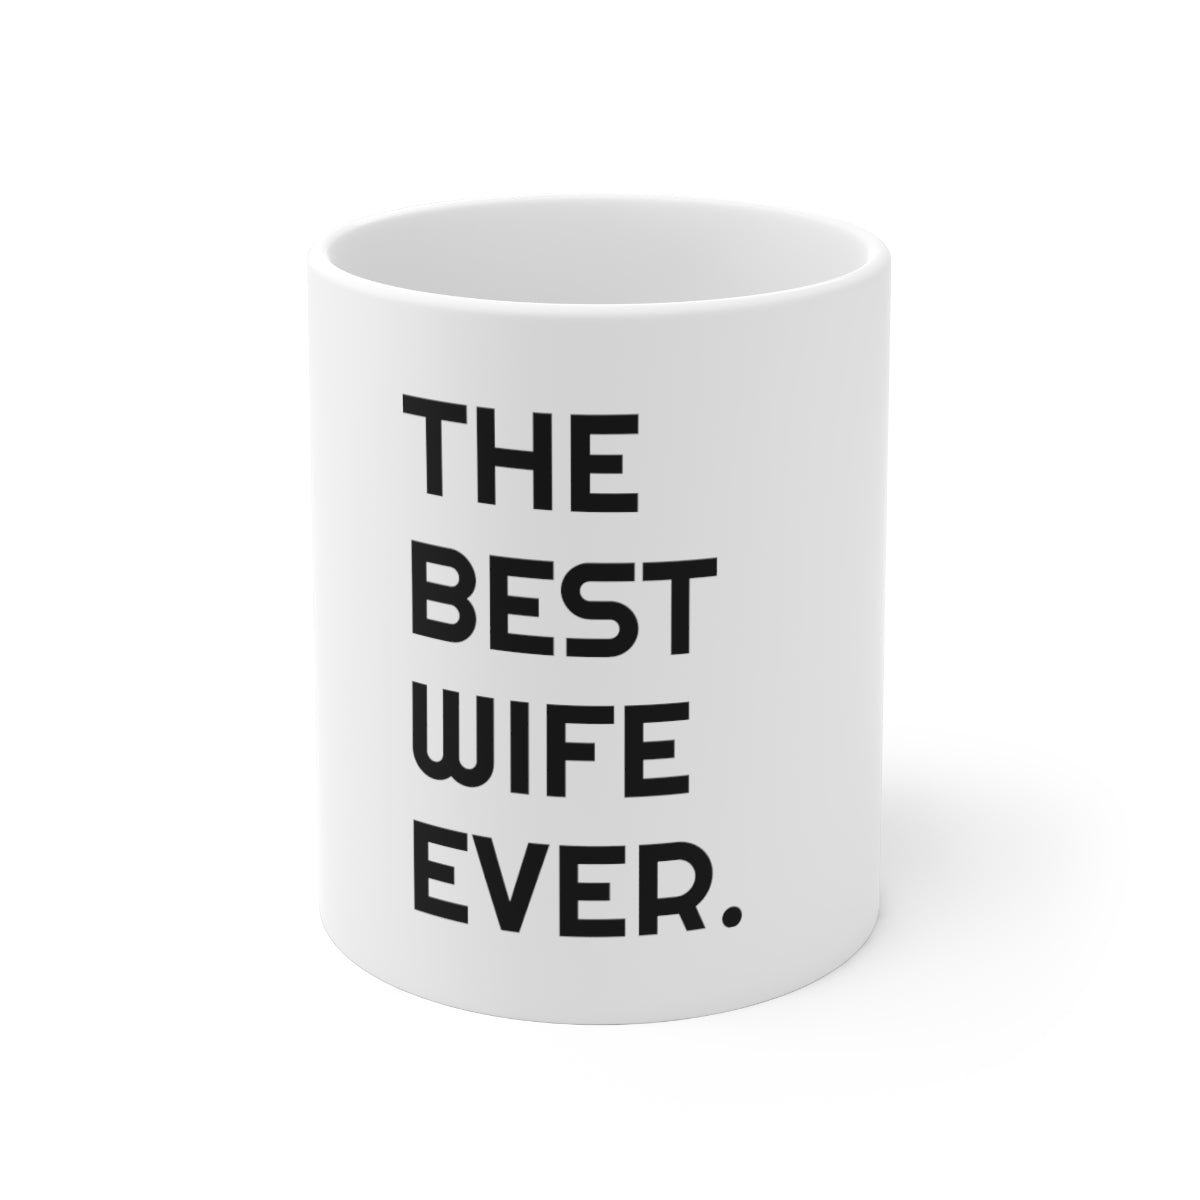 The Best Wife Ever. Coffee Mug for your husband:)